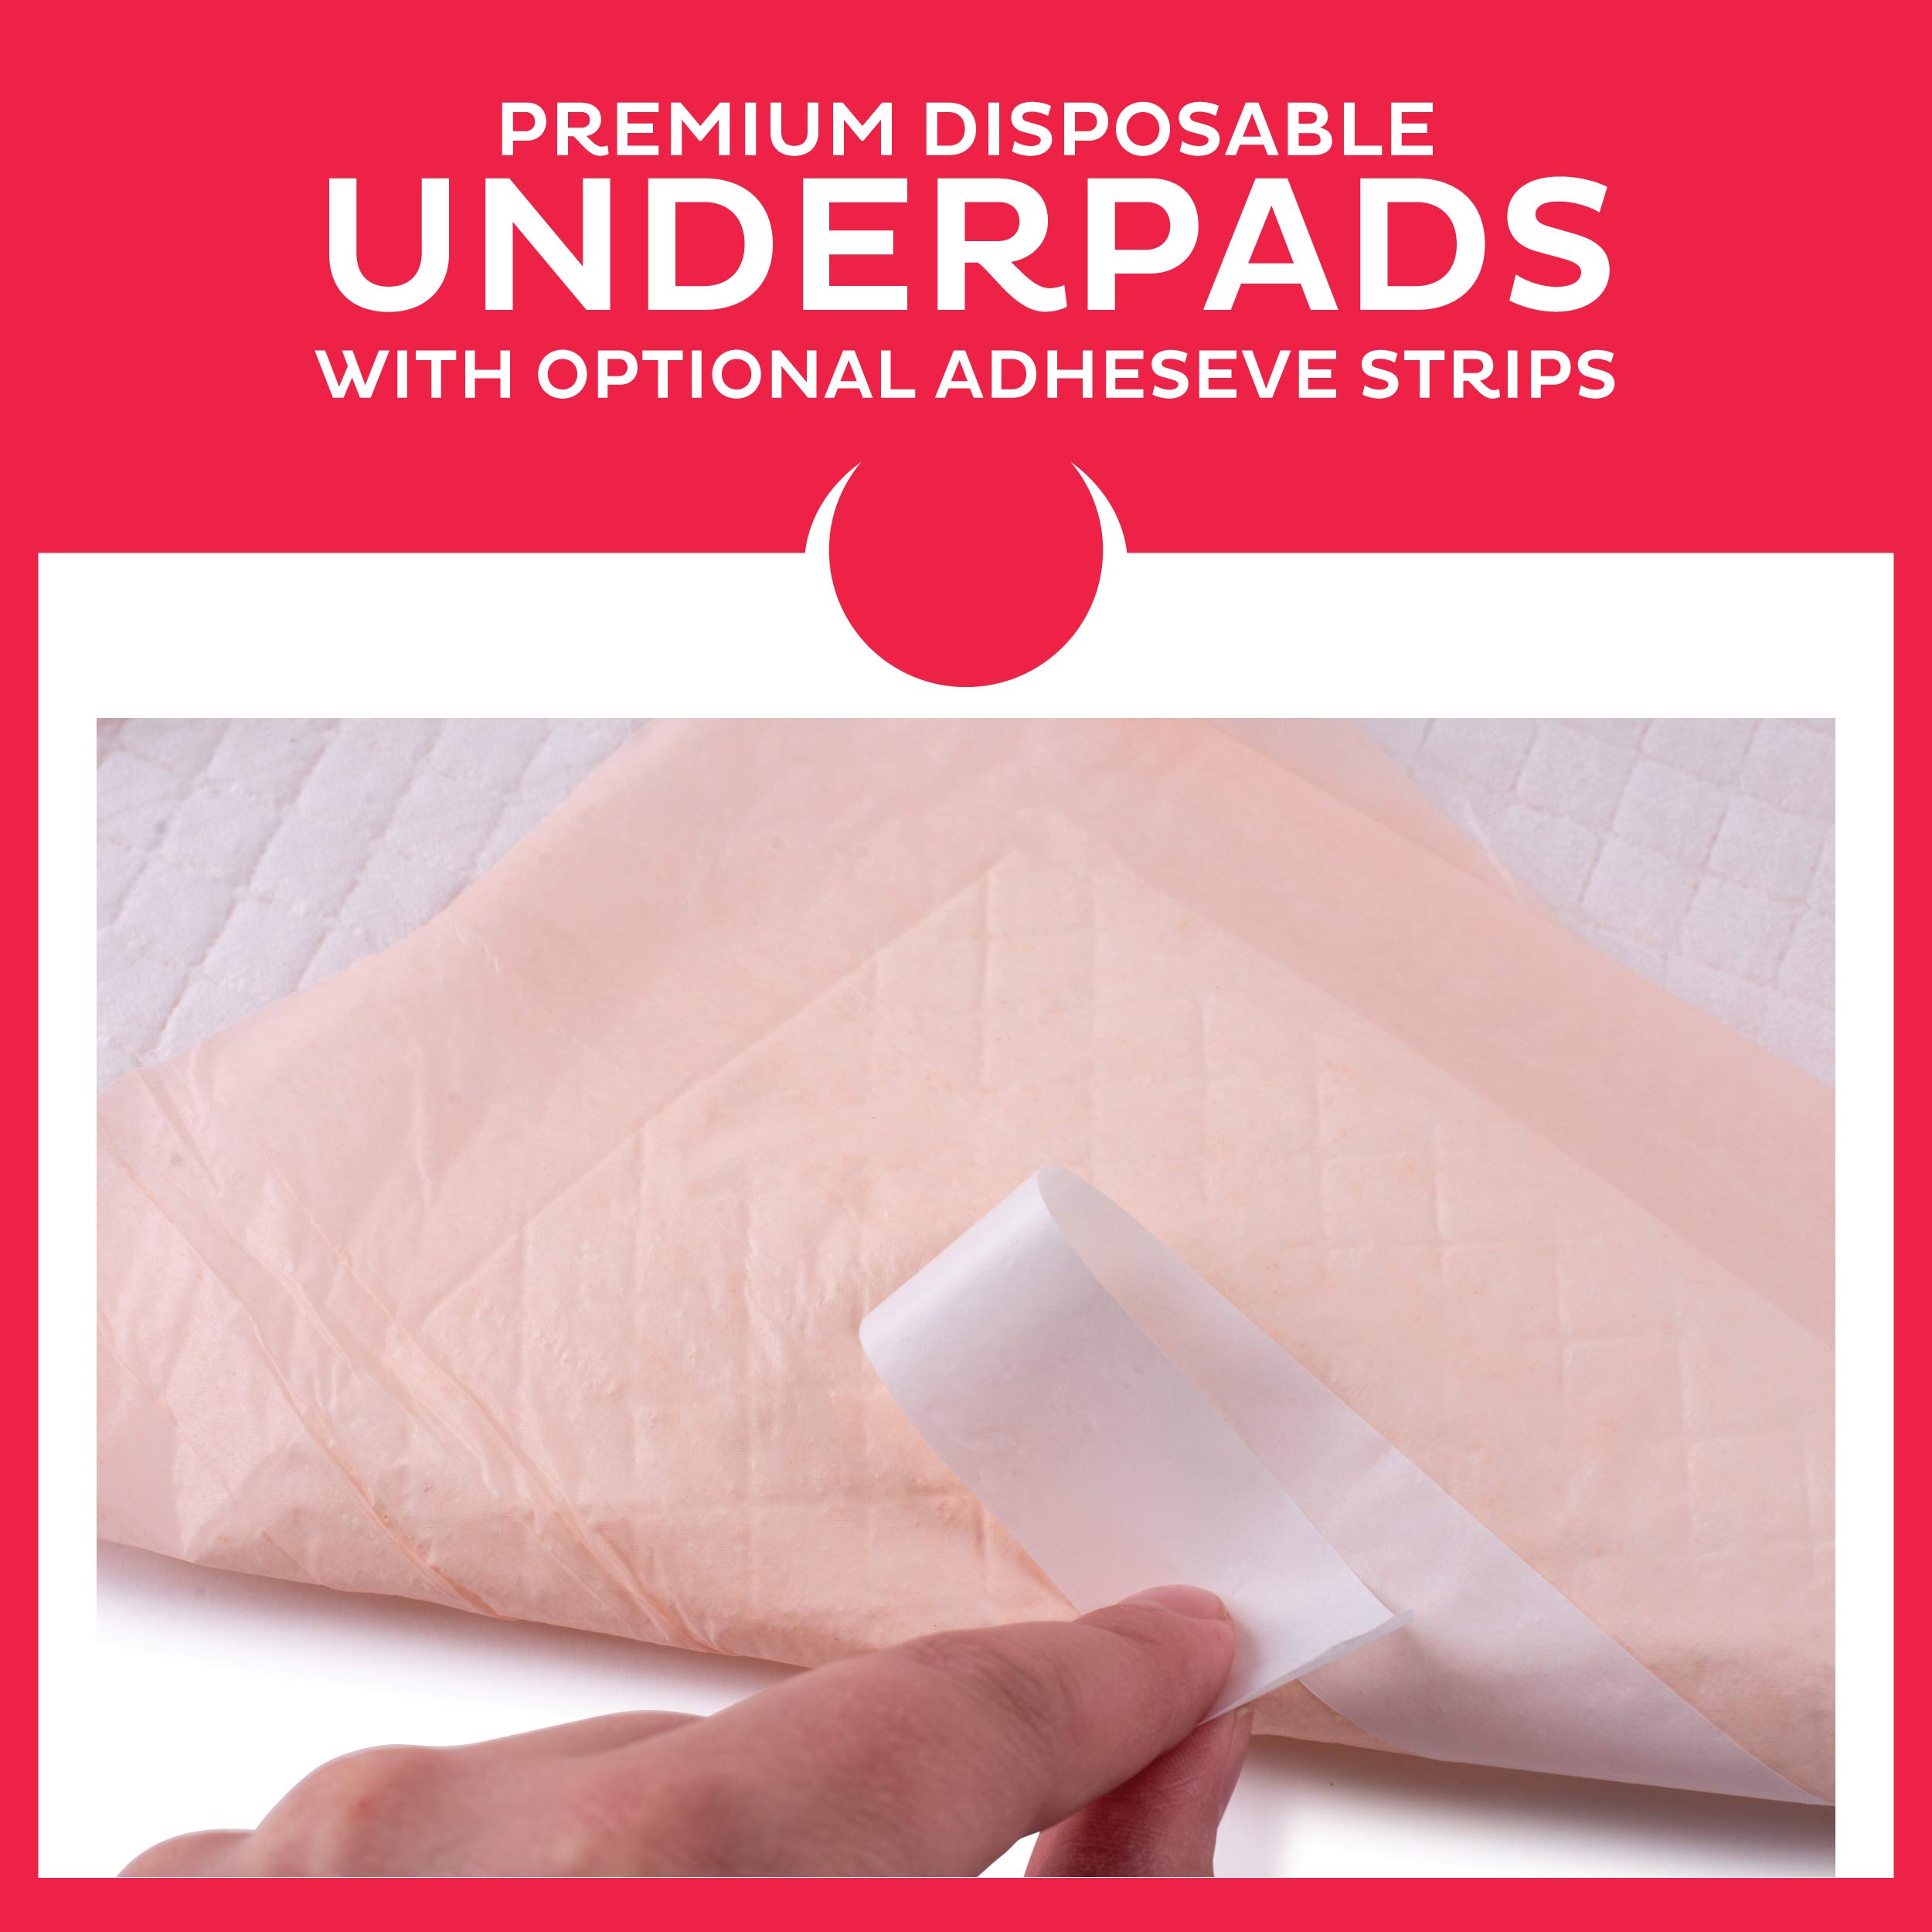 Premium Disposable Bed Pads for Adult Incontinence [100 PADS] 30 X 36 Heavy Duty Pee Pads for Beds - Ultra Absorbent Chux Disposable Underpads for Adults 30x36 - XX-Large